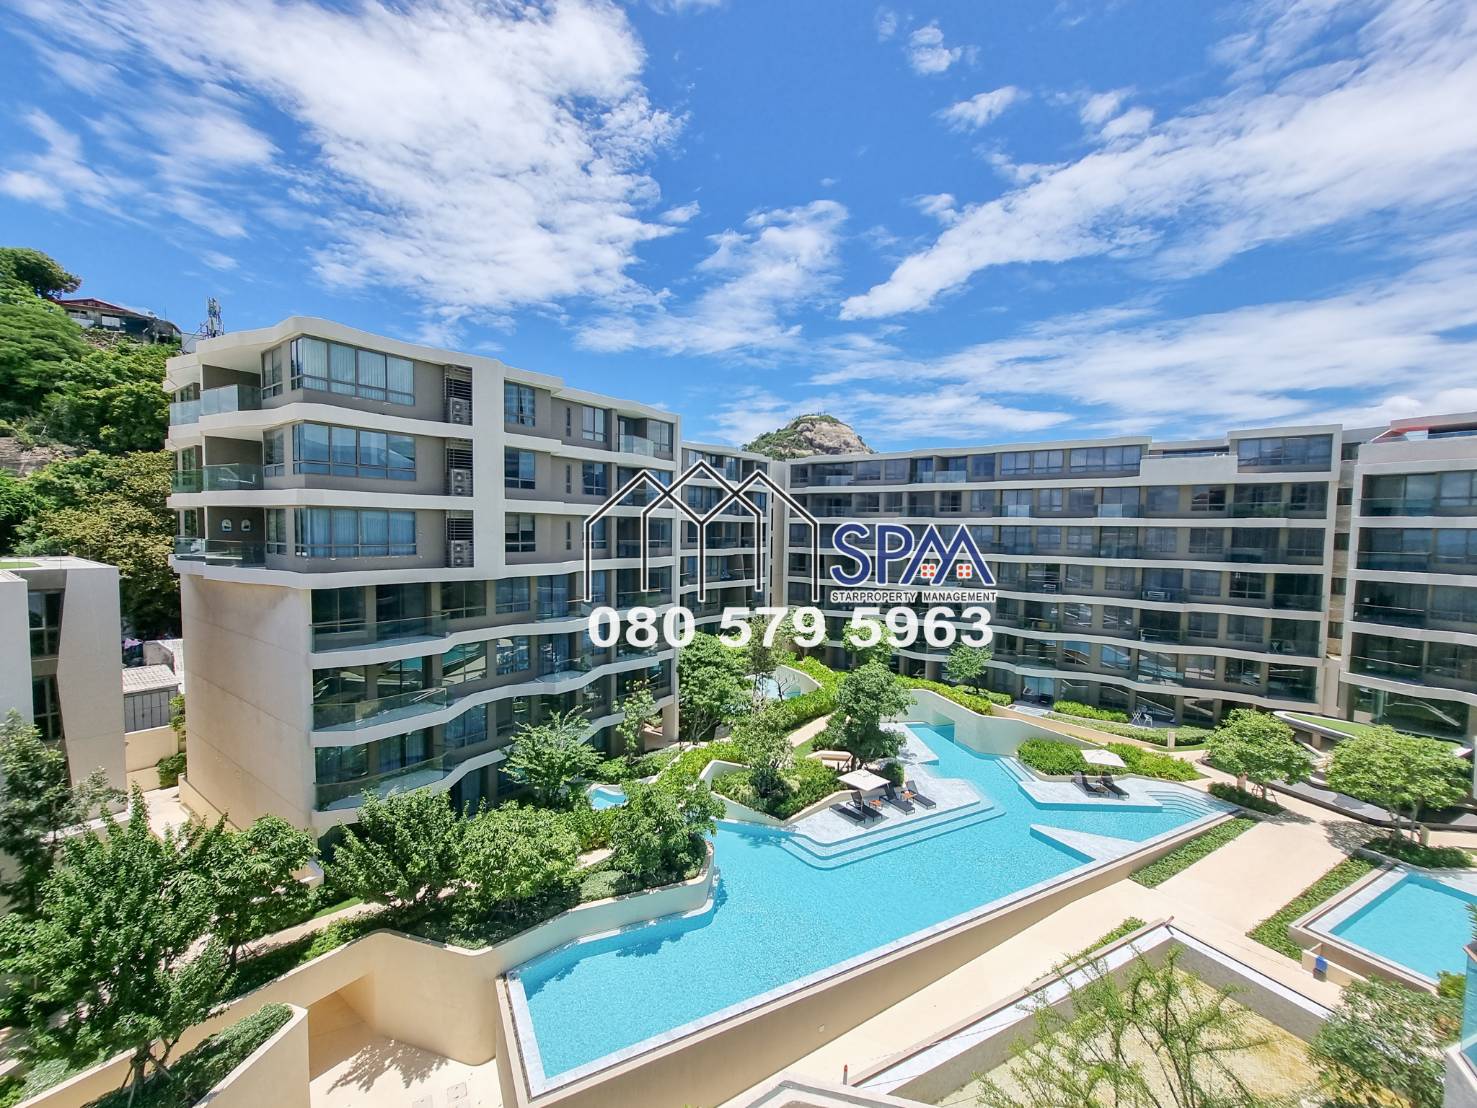 2 Bedrooms unit with pool view, 64 sqm price 7.49 Million Baht at Veranda Residence Hua Hin for sale